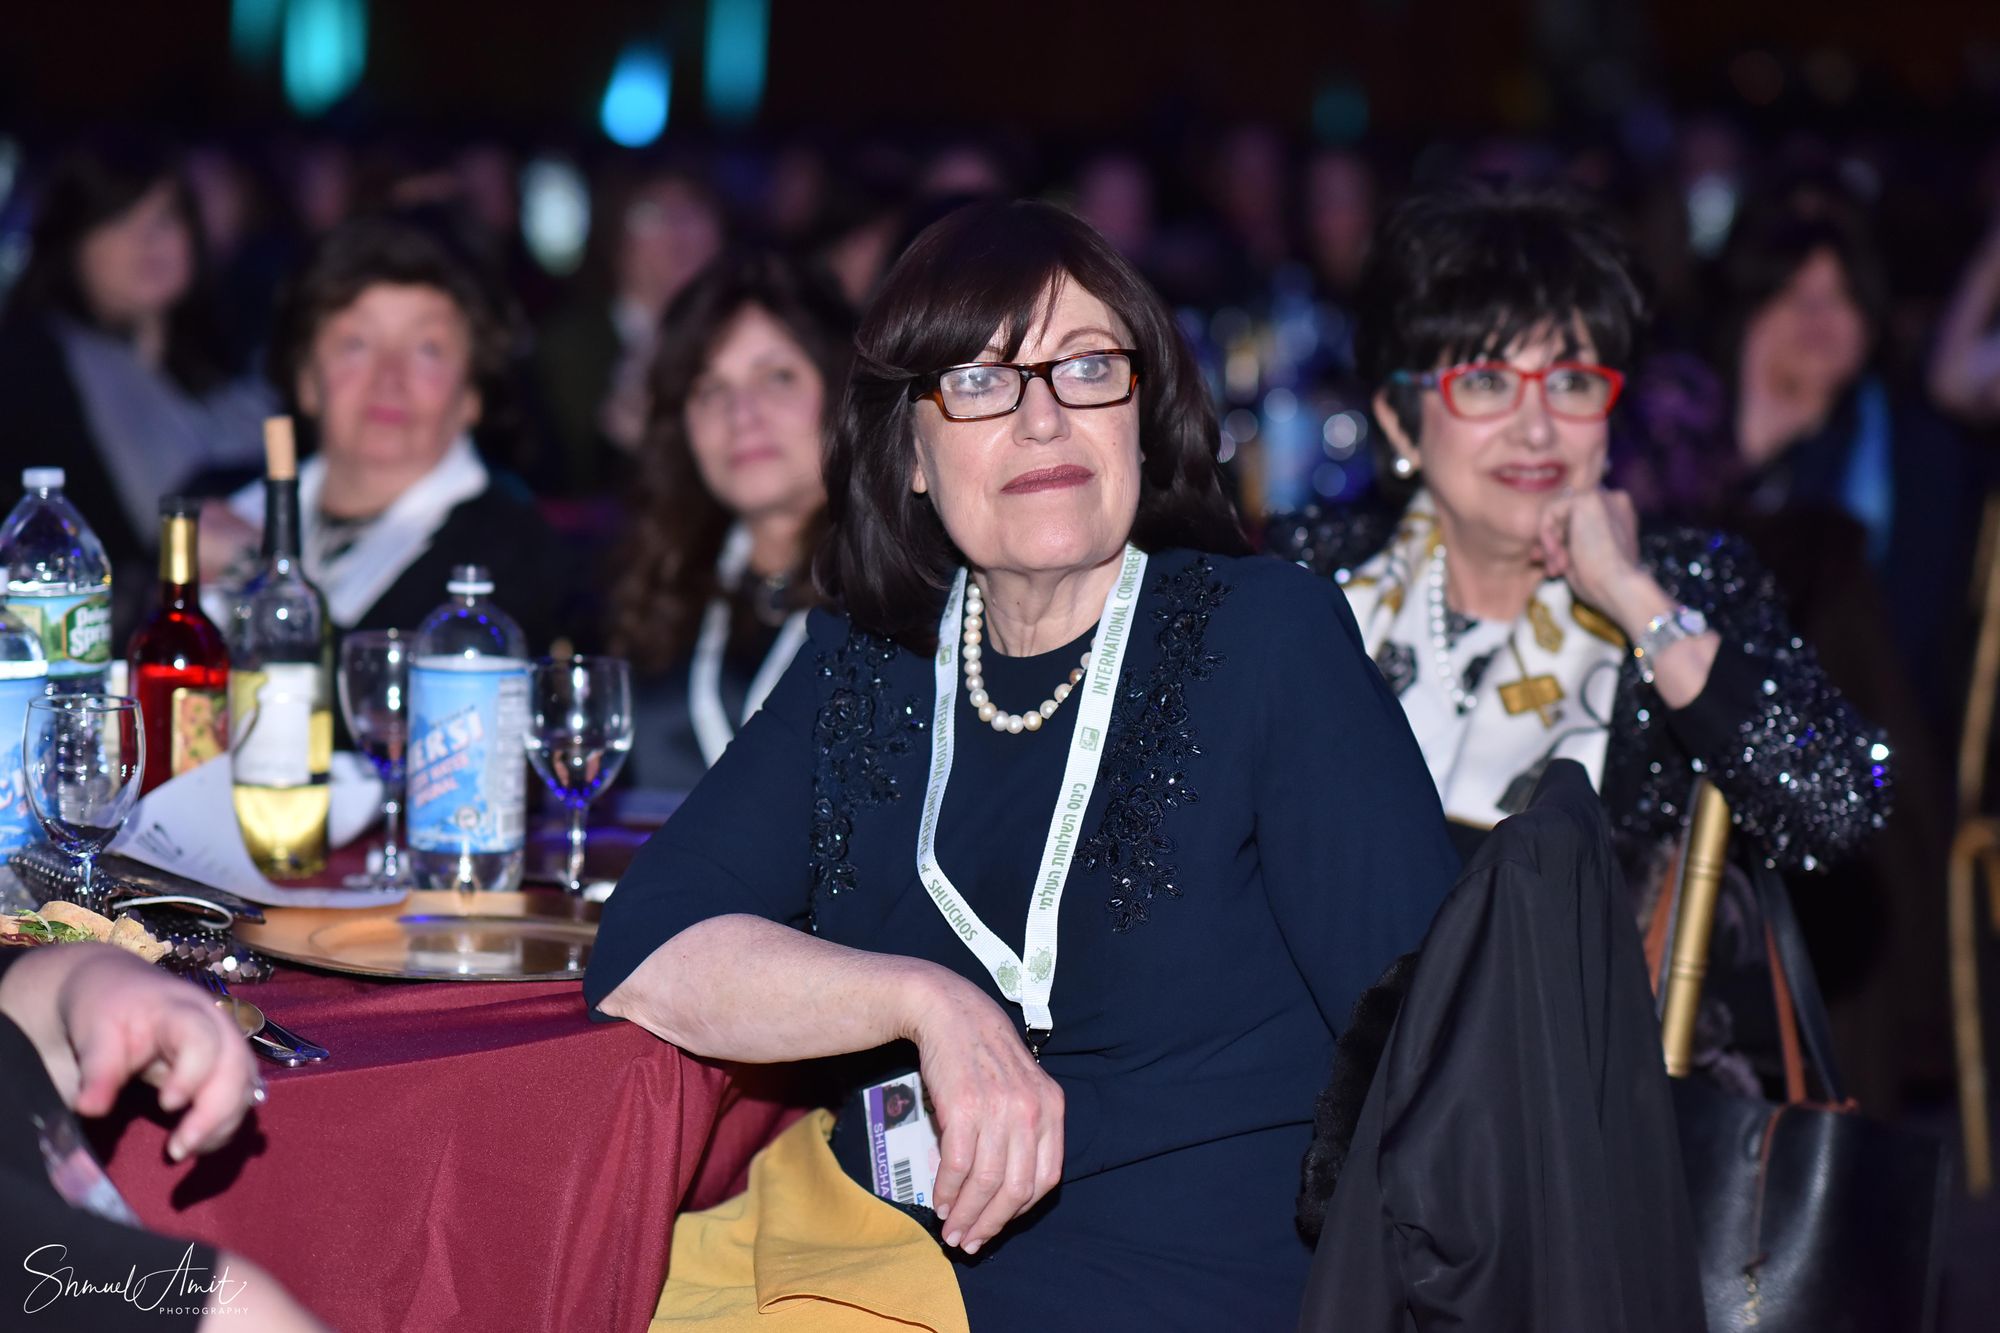 From Crown Heights To The Congo – 3,000 Chabad-Lubavitch Women Gather To Make The World Better